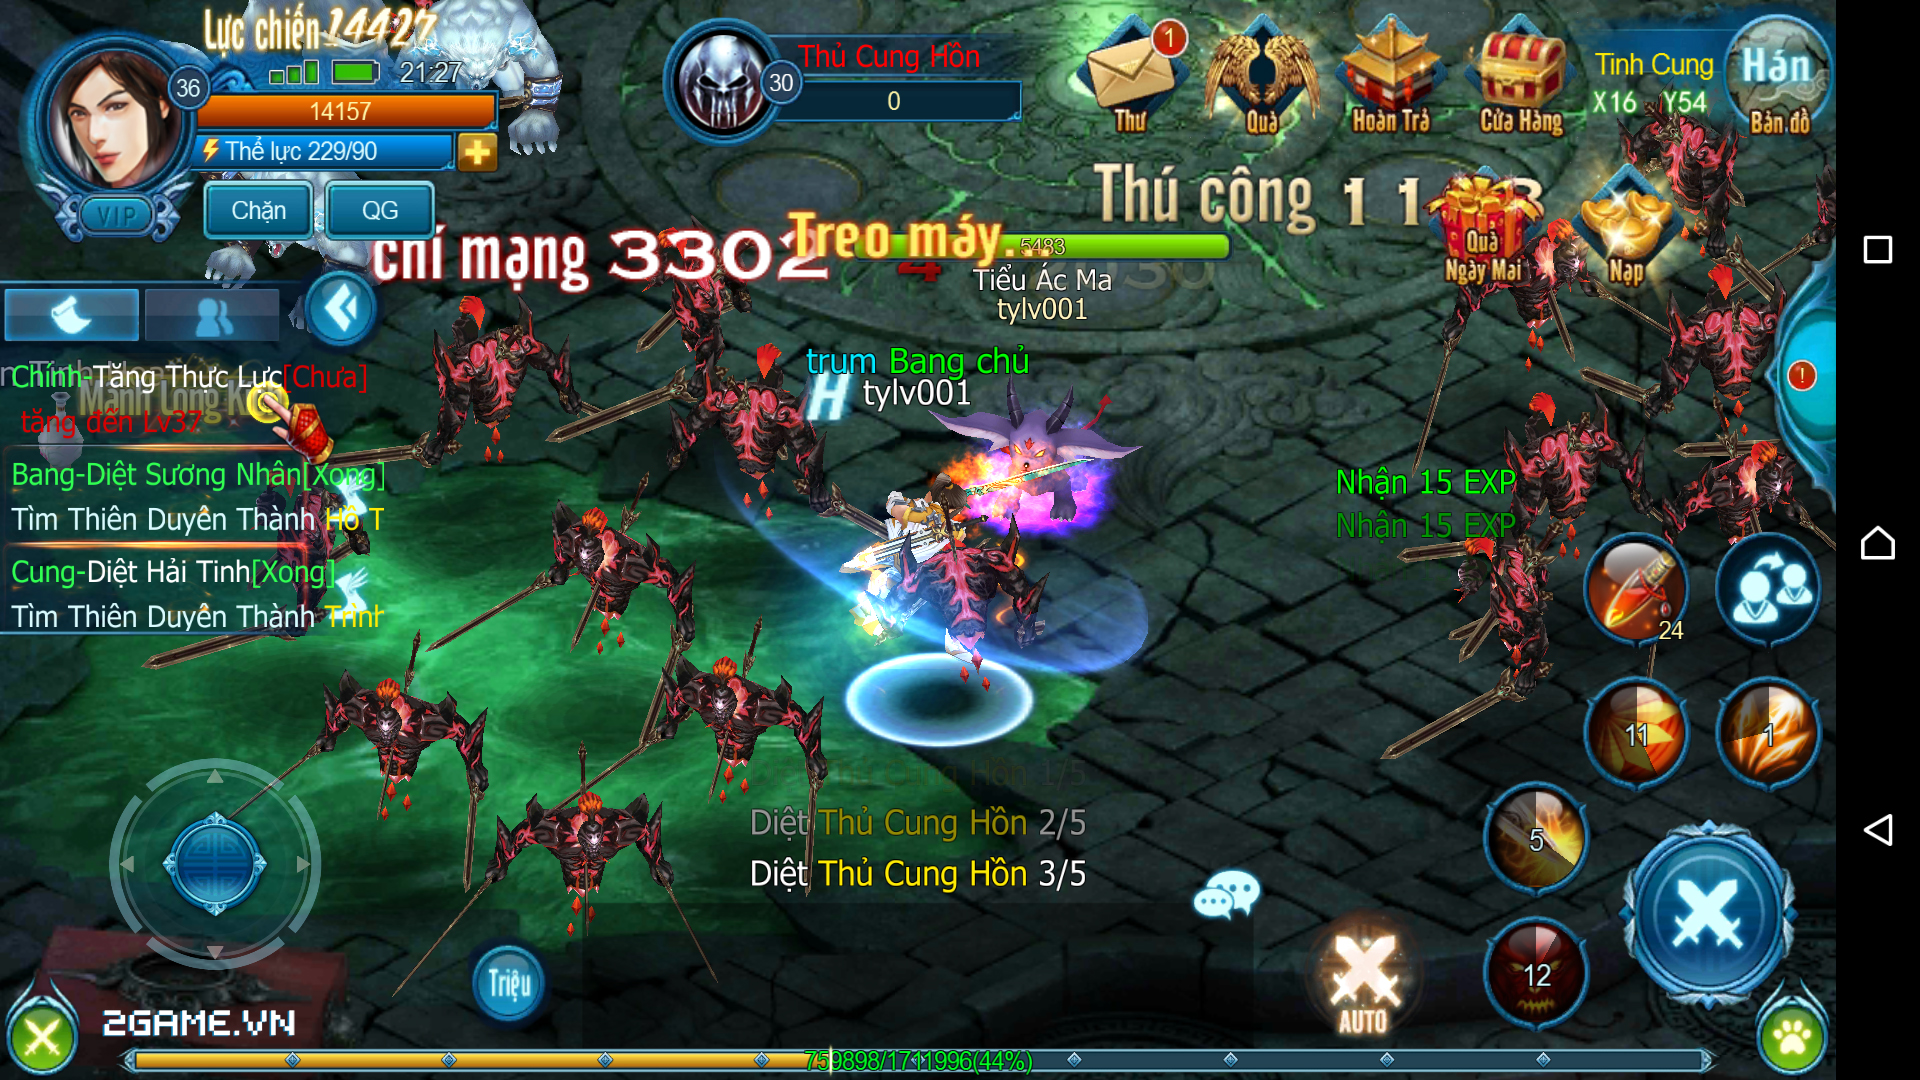 https://s3.cloud.cmctelecom.vn/2game-vn/pictures/images/2015/10/26/2game-trai-nghiem-ban-long-3d-mobile-10.jpg